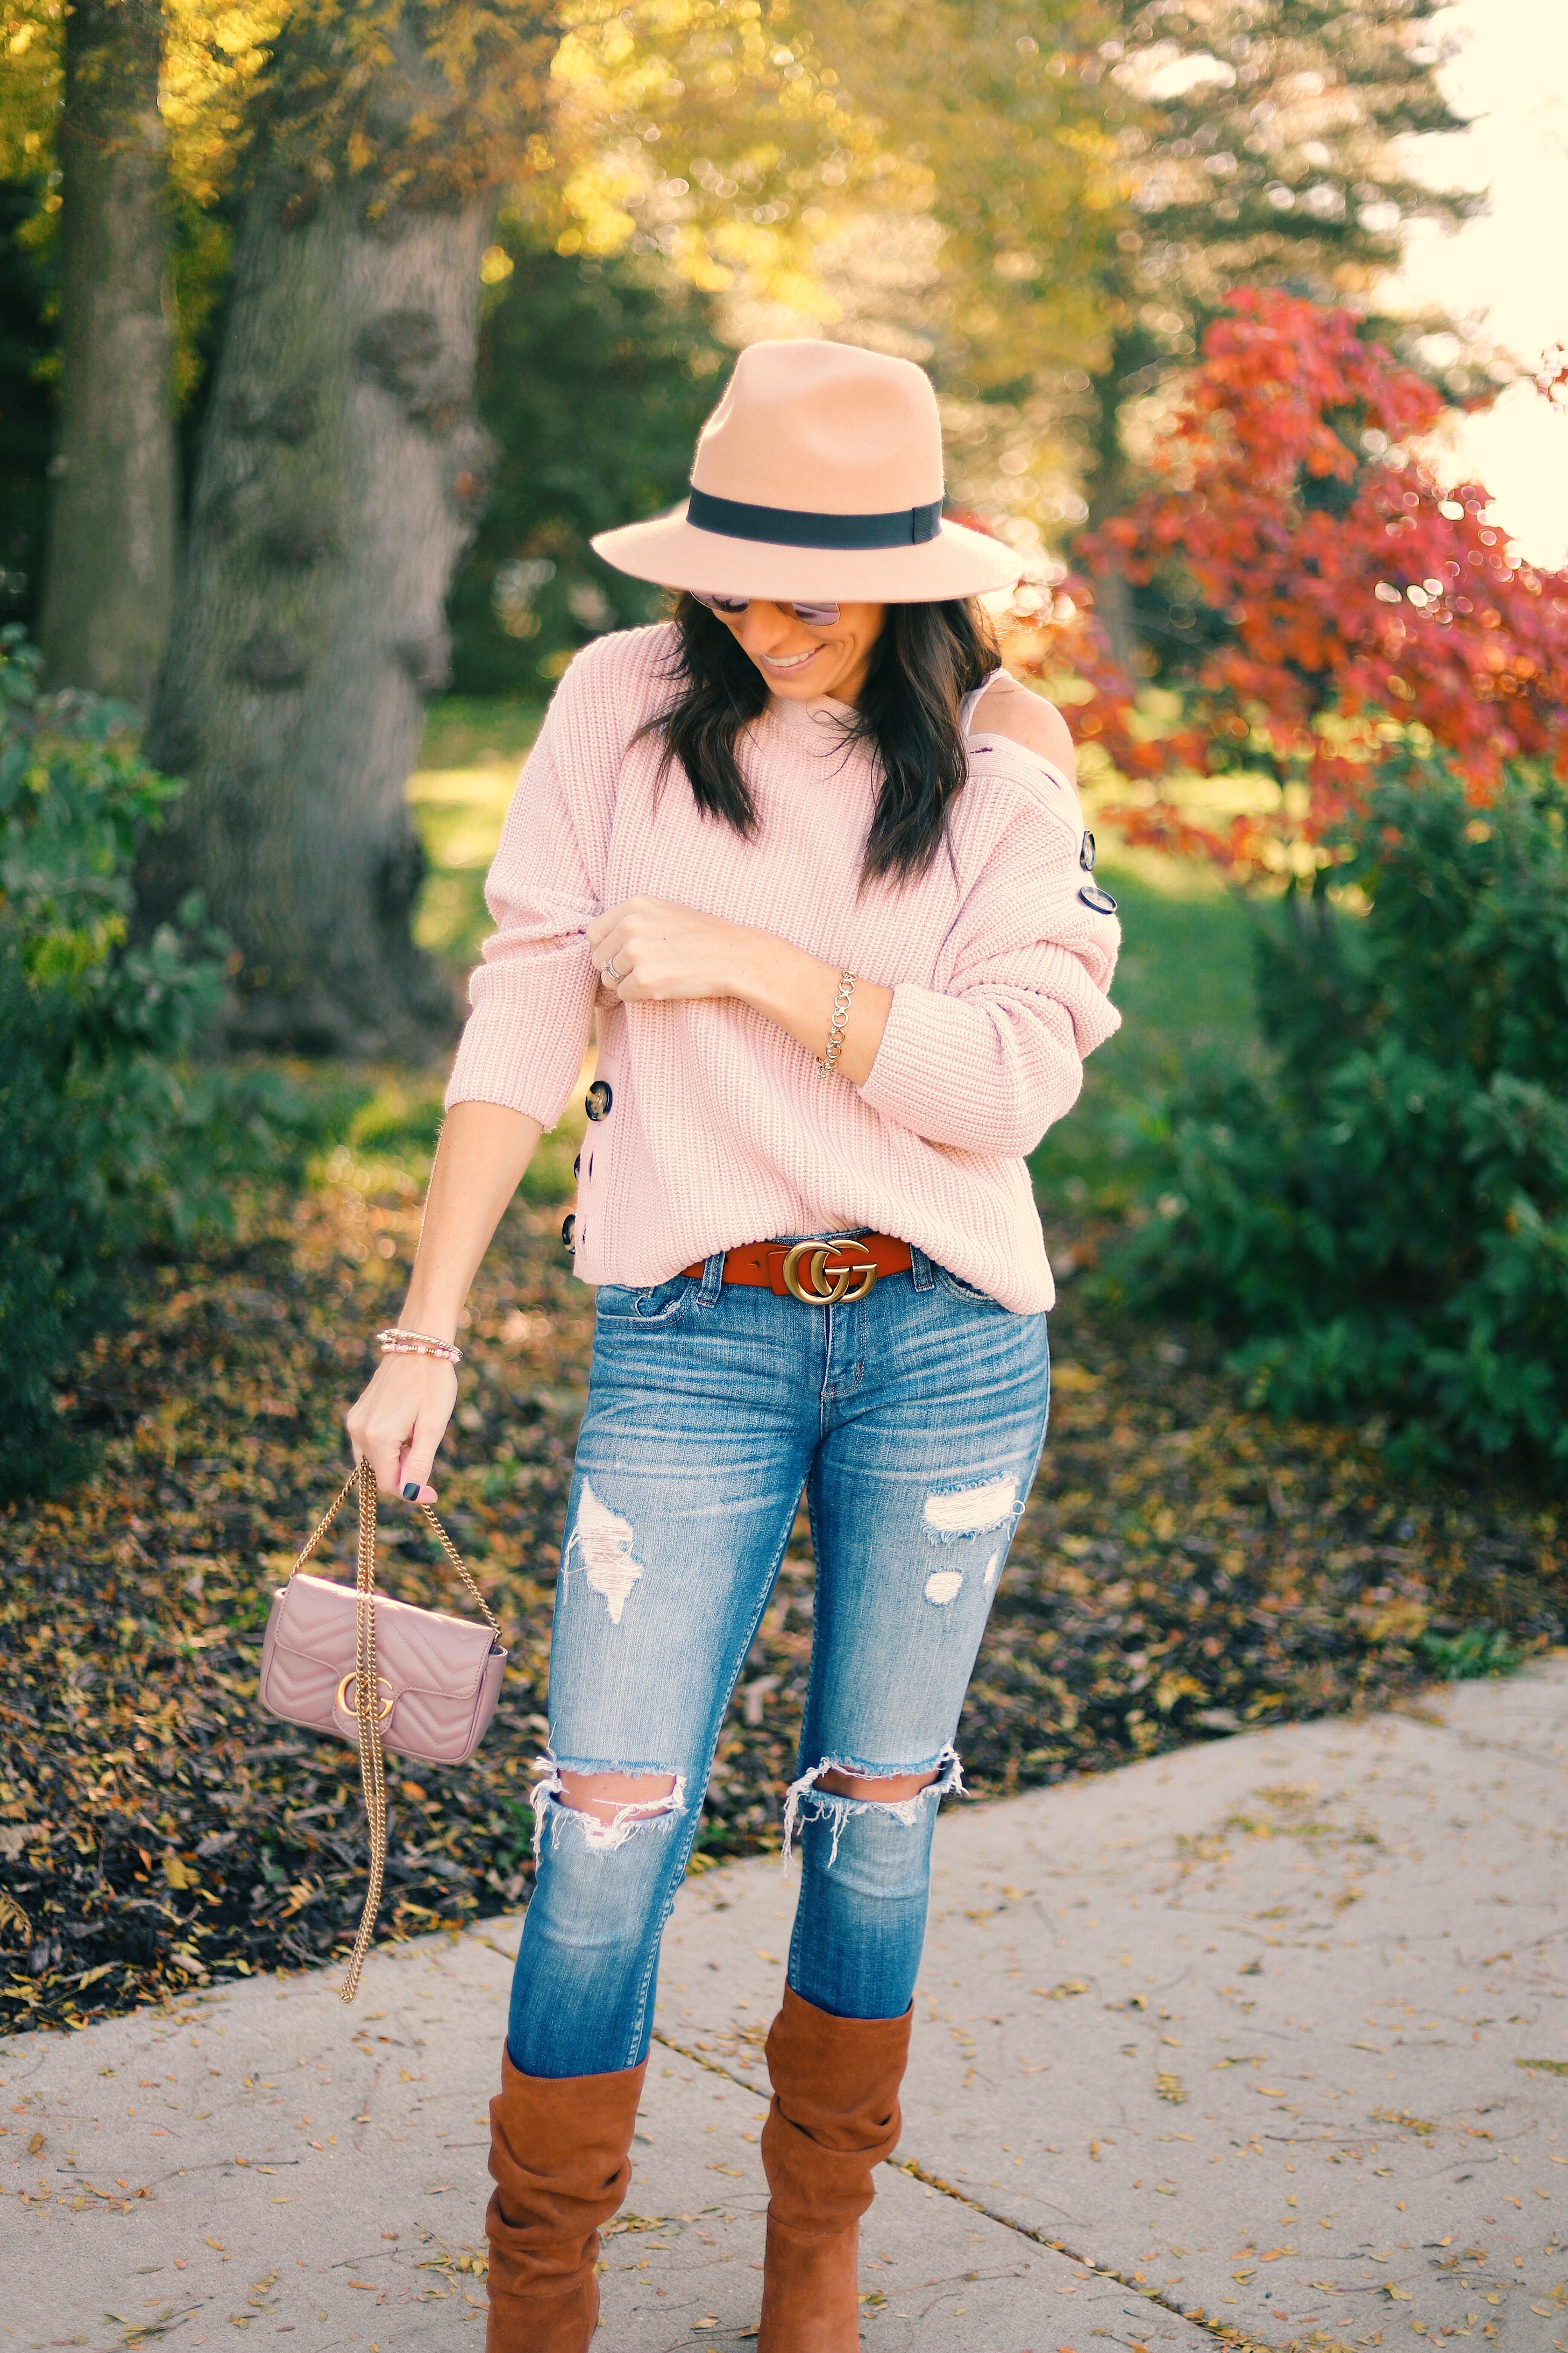 Button Shoulder Sweater Revolve Felt Hat Brown Gucci Belt Distressed Denim Brown Chinese Laundry Boots Gucci Purse